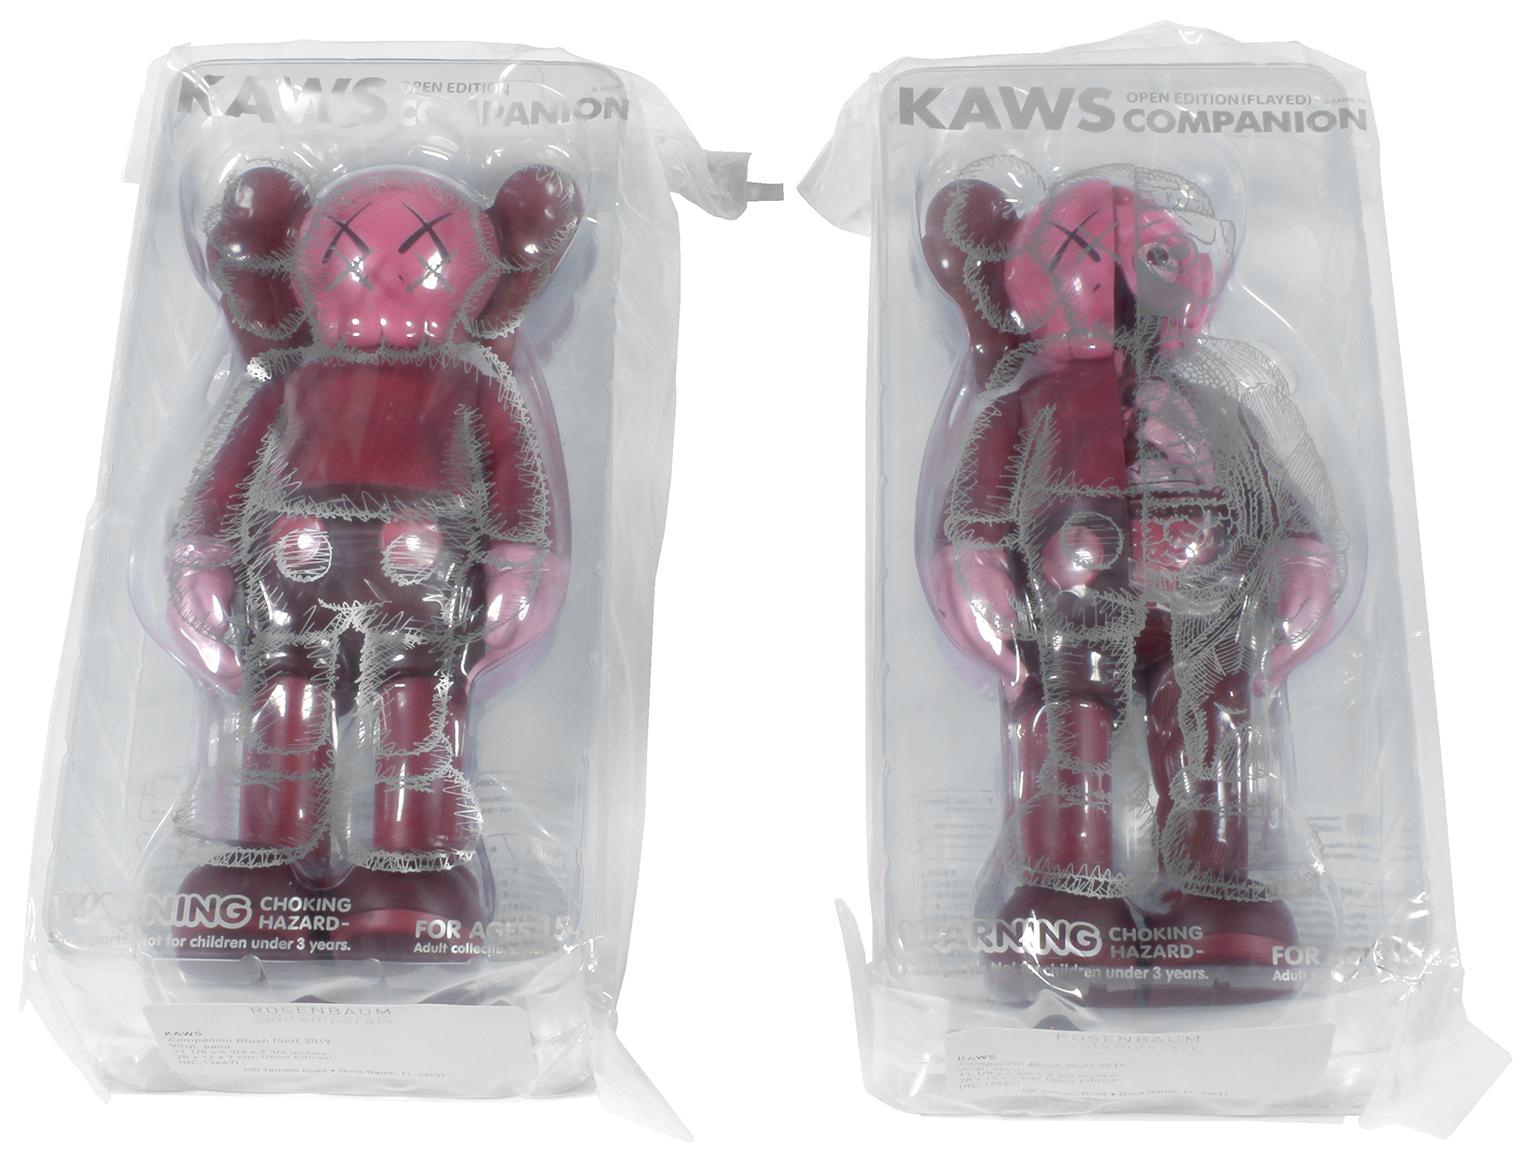 What is the most popular KAWS art?